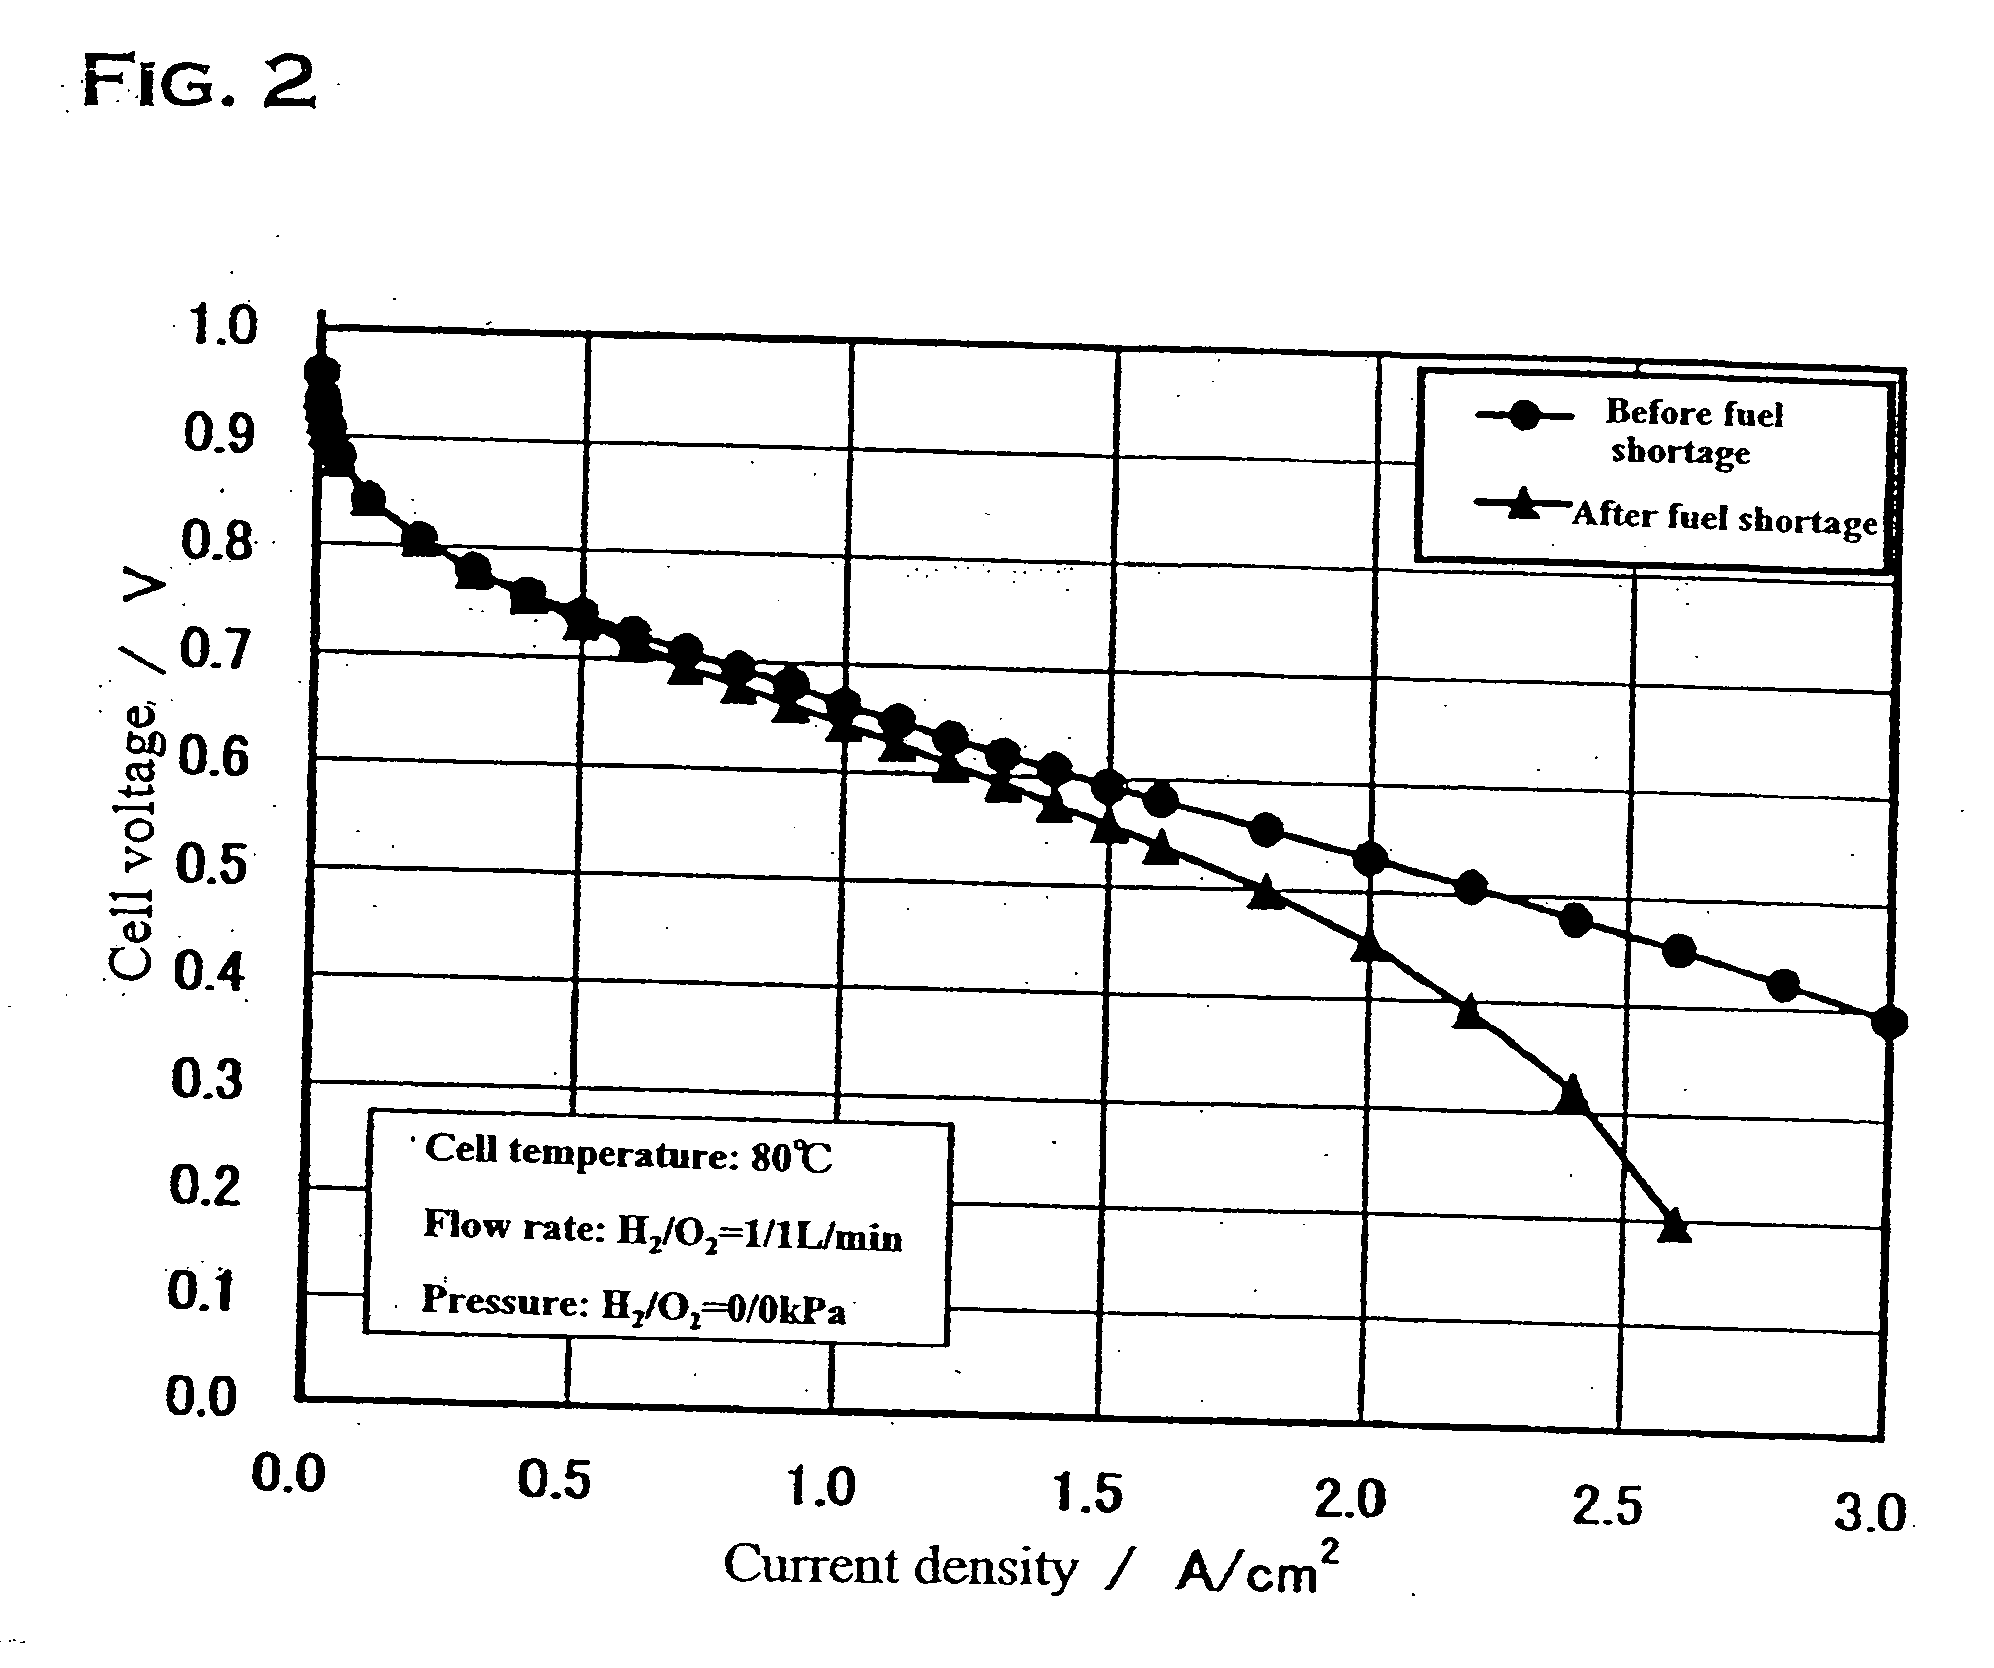 Fuel electrode of solid polymer electrolyte fuel cell